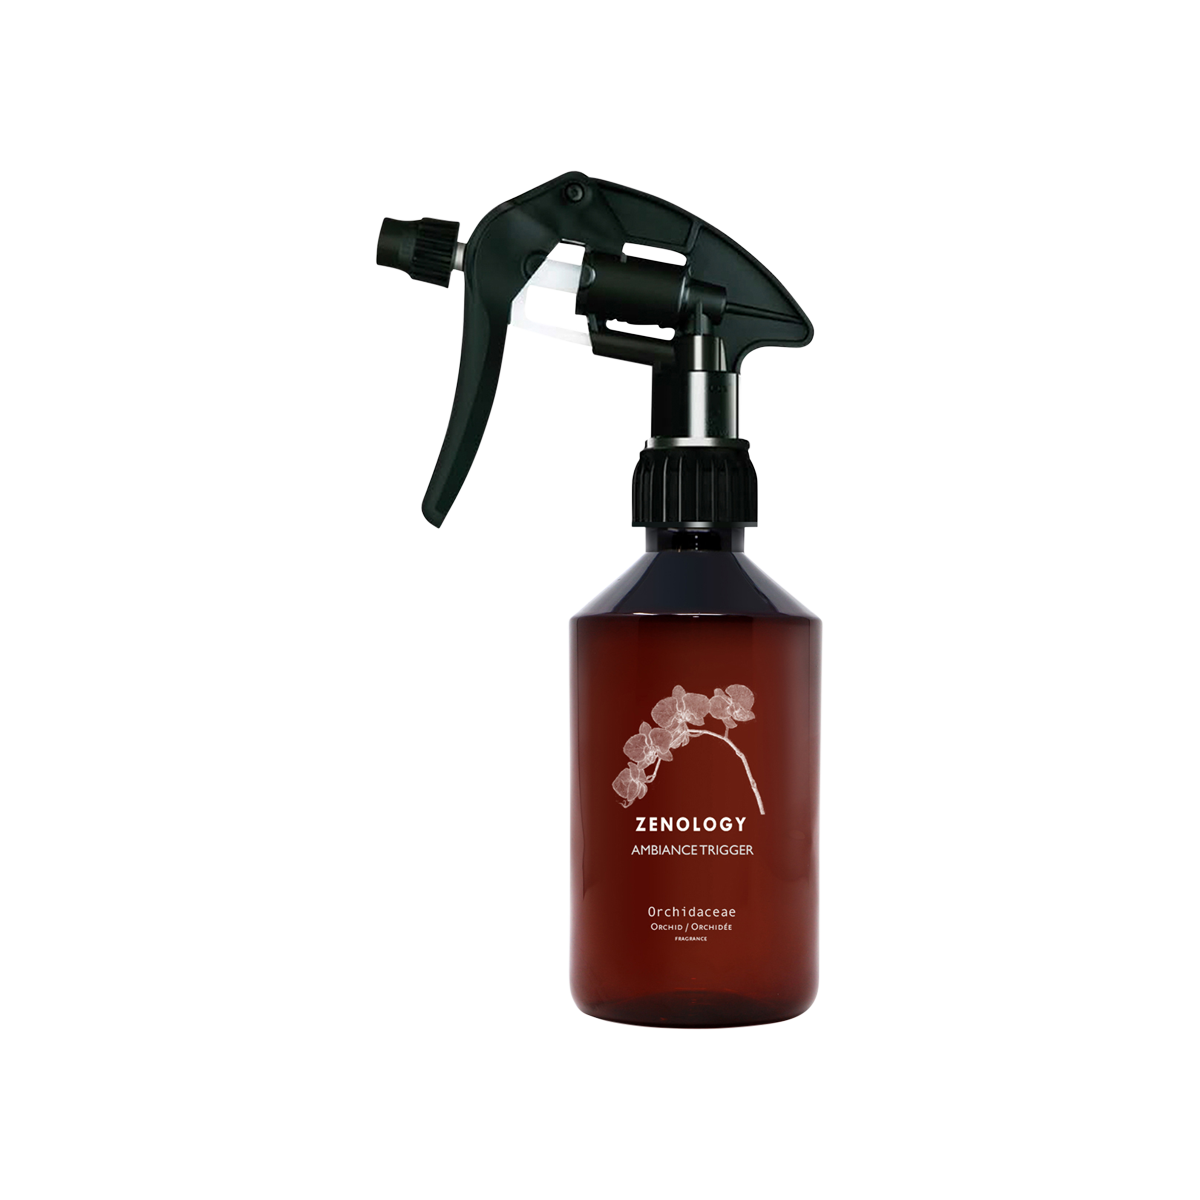 Zenology - Orchidaceae Ambiance Trigger Spray